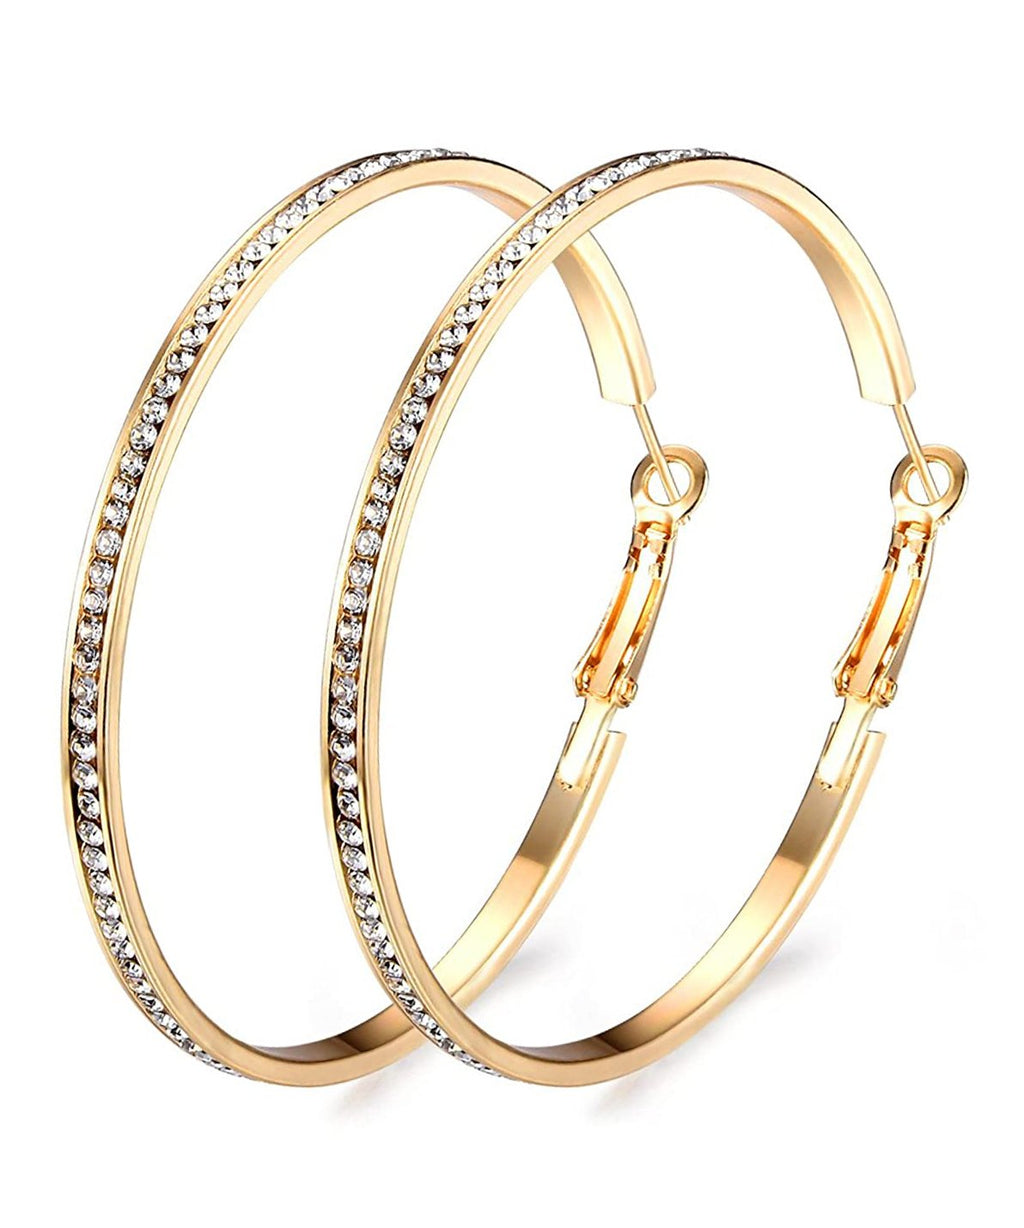 2" Pave Hoop Earring With Crystals in 18K Gold Plated